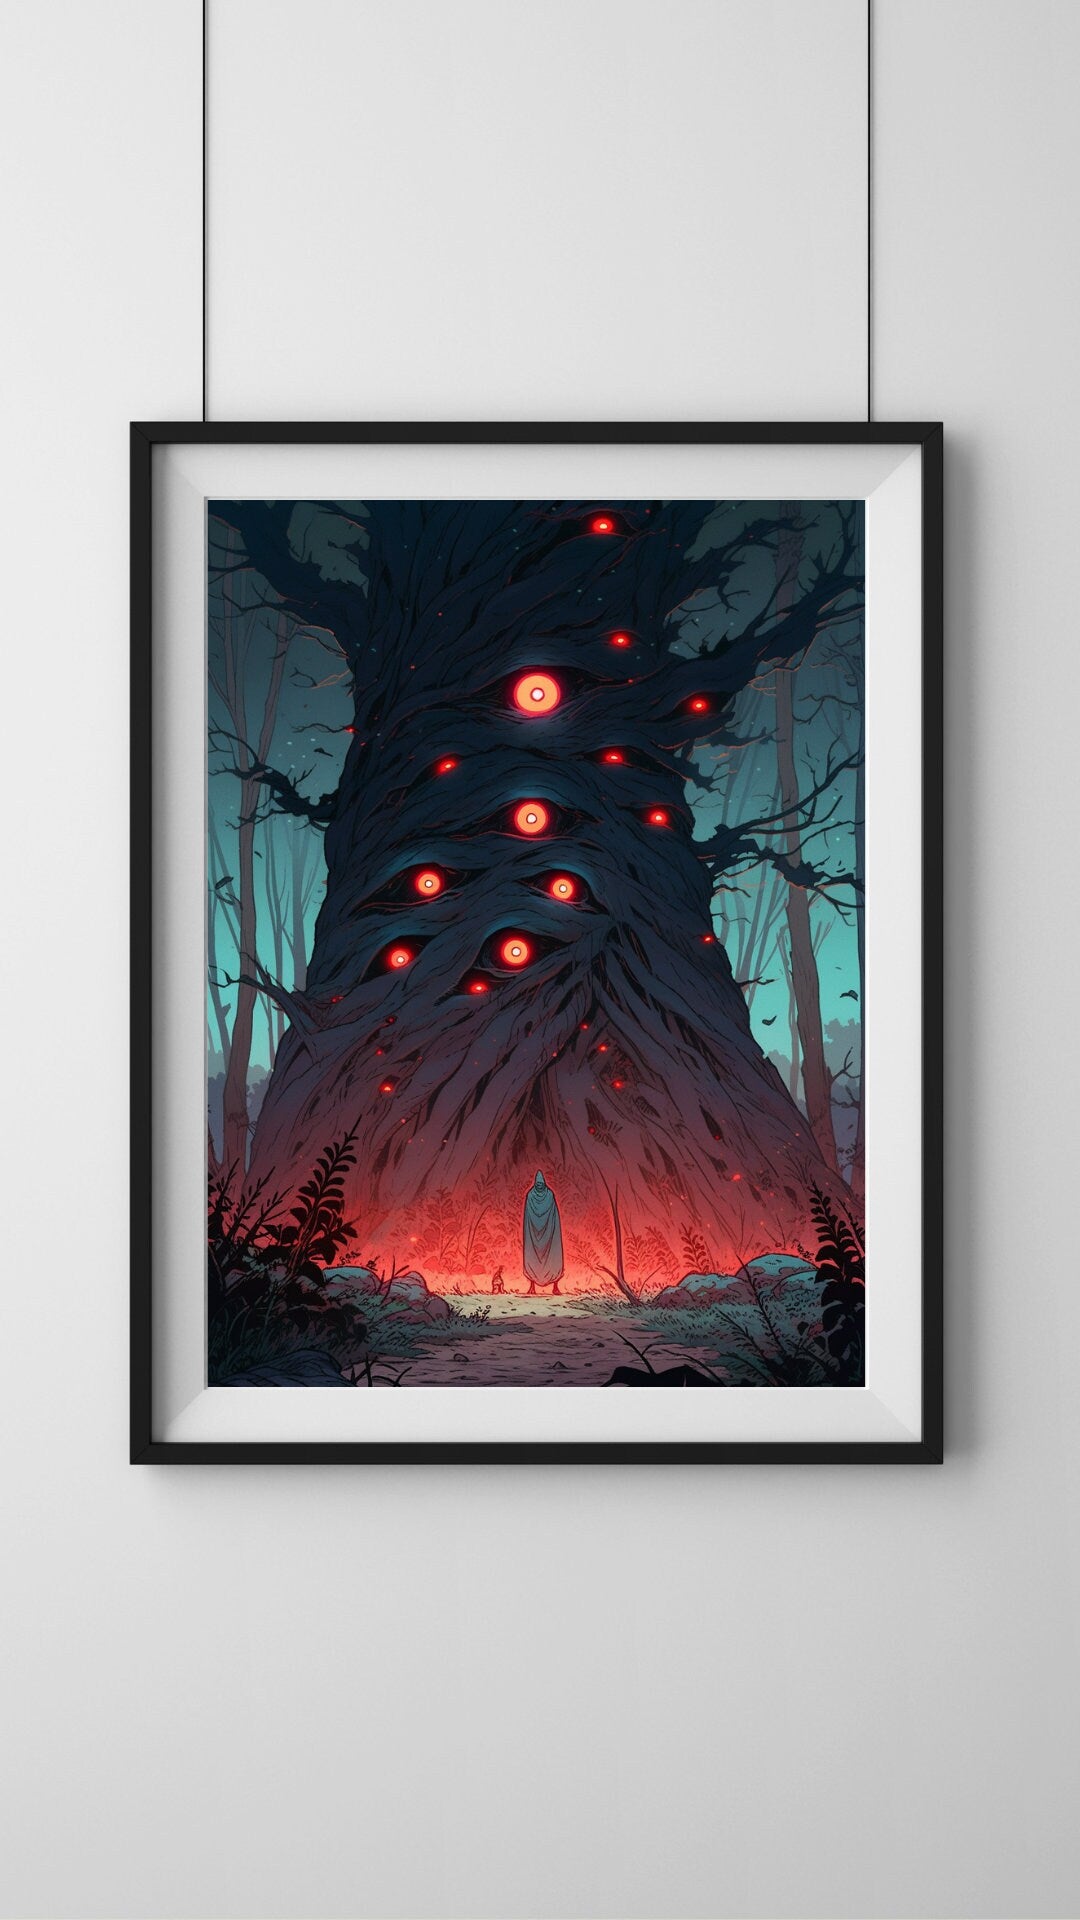 Eldritch Forest - Menacing Tree with Glowing Eyes Art Print - Original Poster - Illustration Print Wall Art - Home Decor